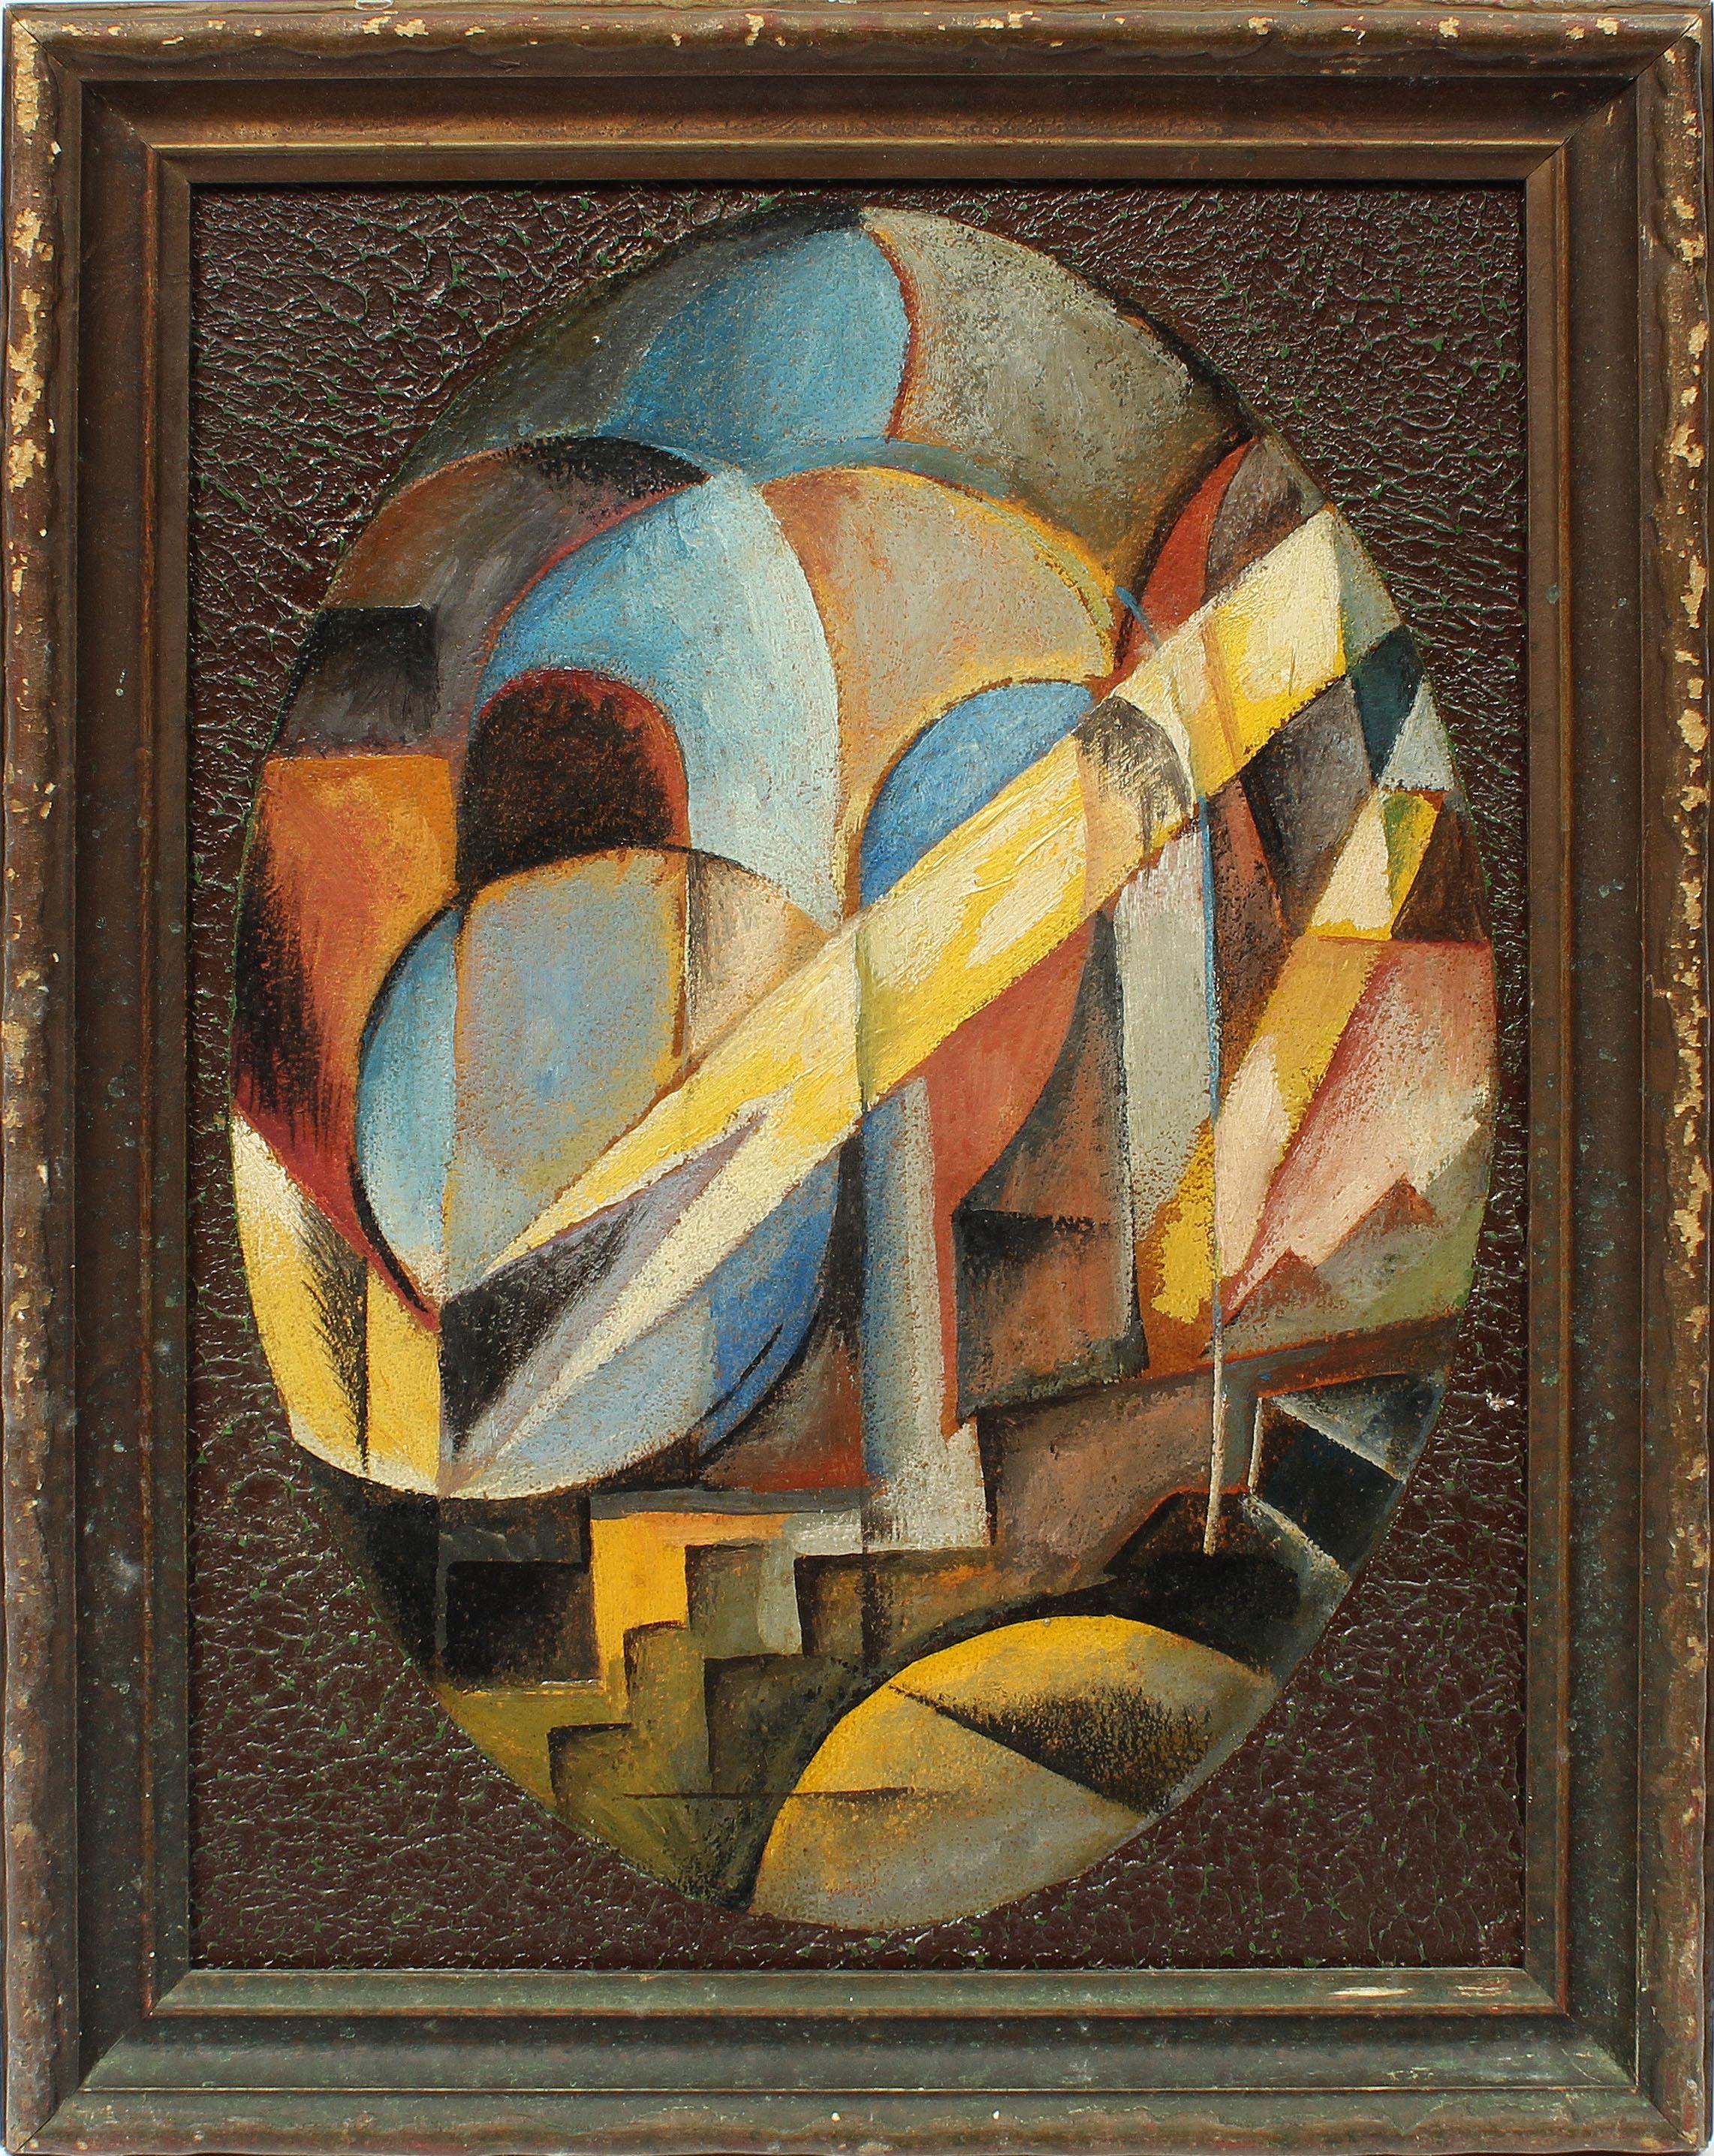 Unknown Abstract Painting - Antique American Modernist 1920s Cubist Cityscape Abstract Original Oil Painting